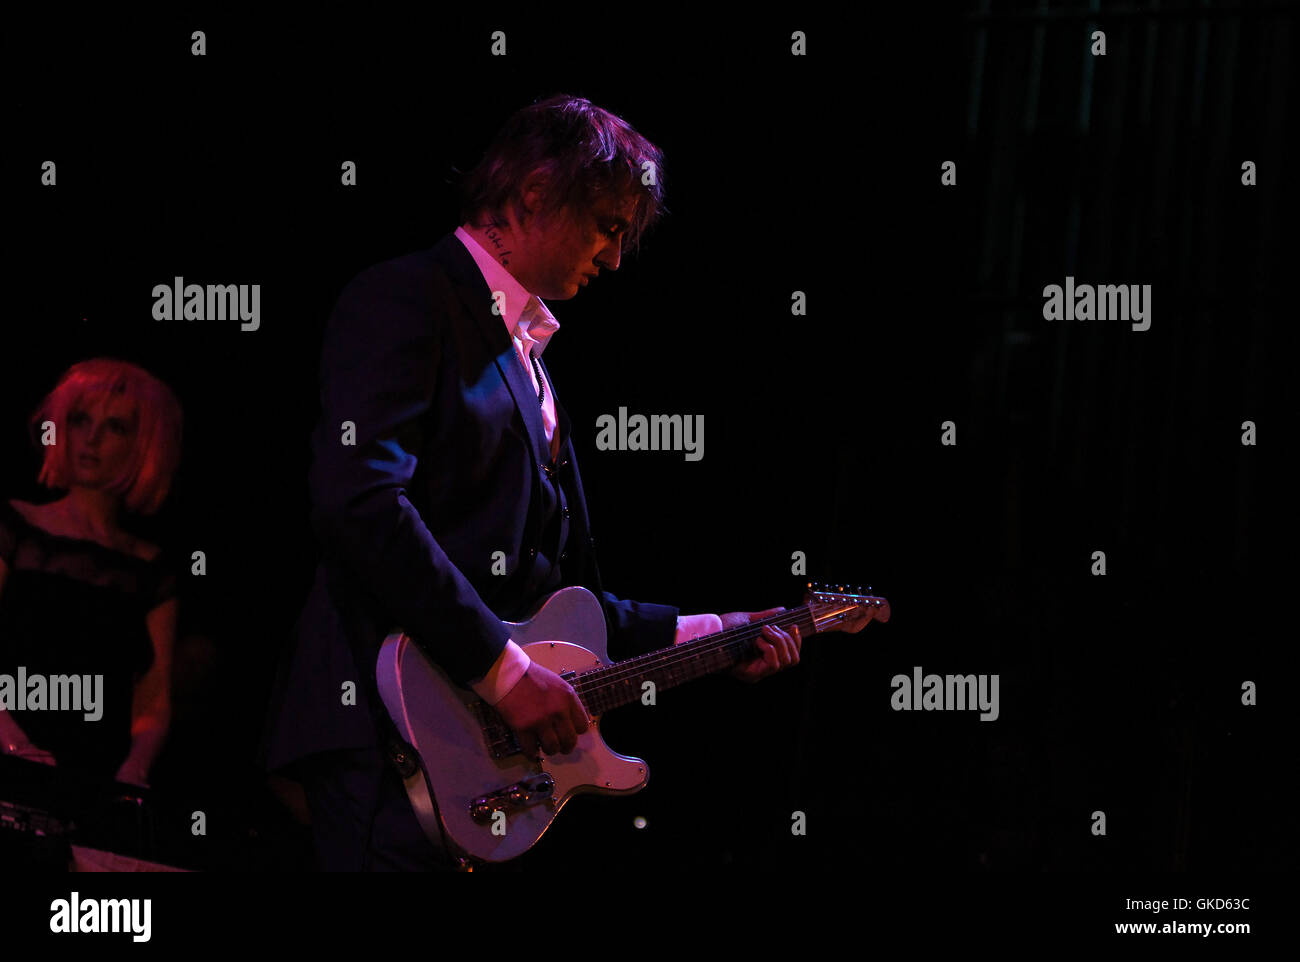 British singer/songwriter Peter Doherty performing at the Hackney Empire on Thursday 5th May 2016 (Photos by Ian Bines/WENN)  Featuring: Peter Doherty Where: London, United Kingdom When: 19 May 2016 Stock Photo